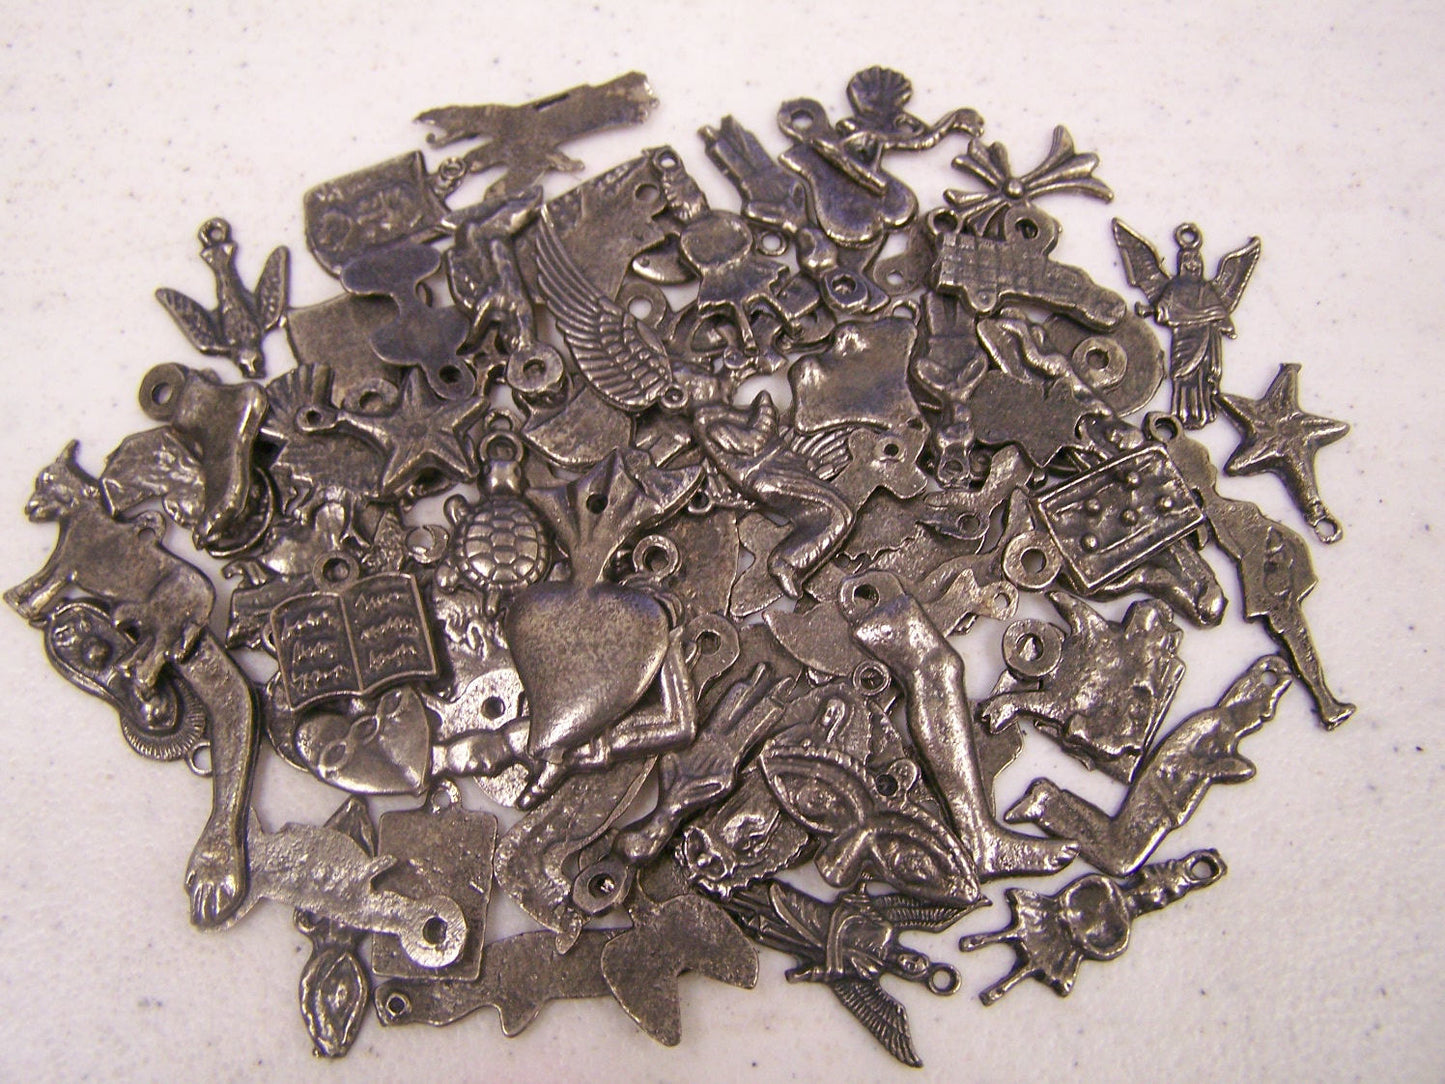 Lot of 50 Different Antiqued/Aged Gray Colored Milagros, Mexico